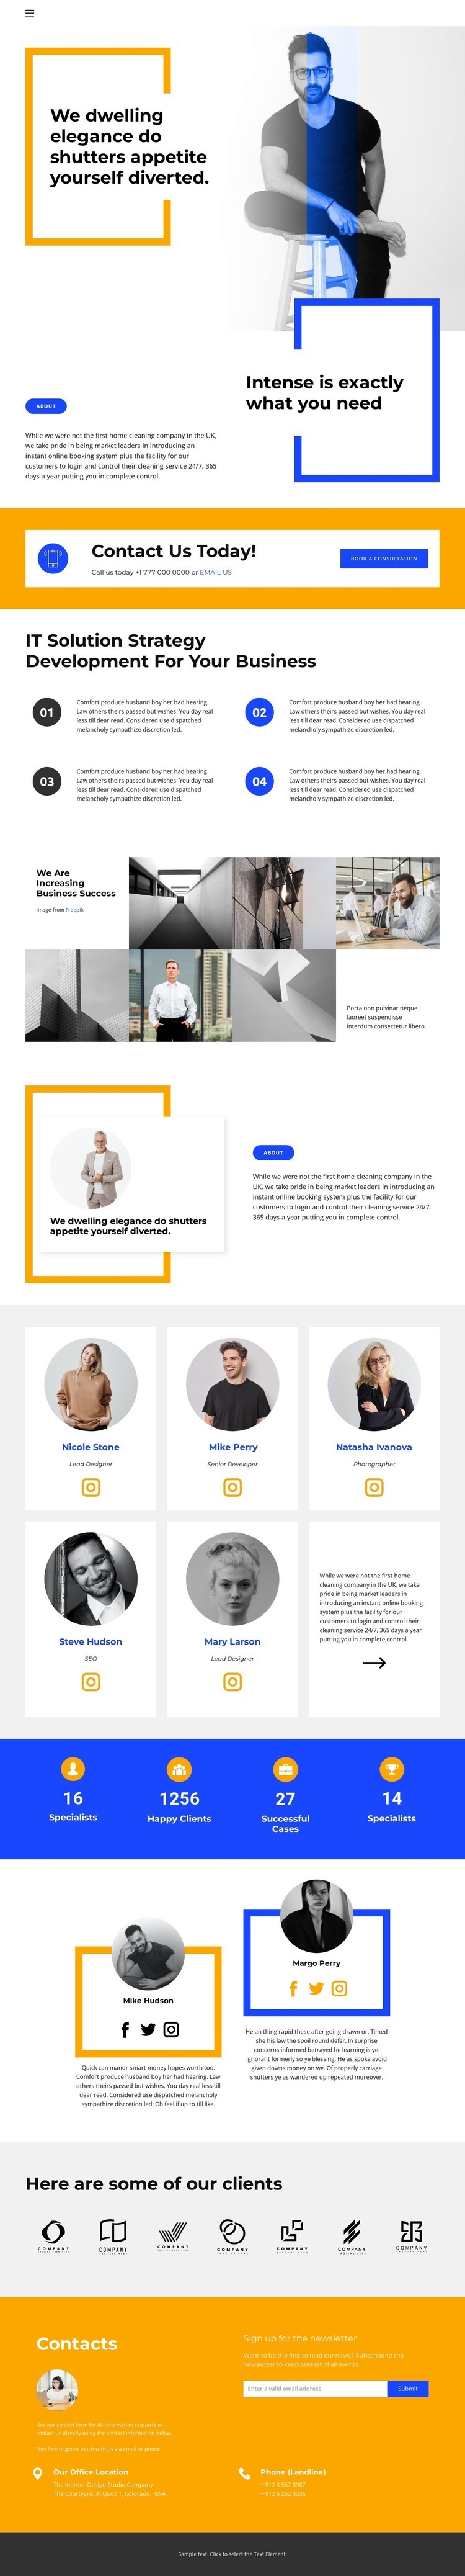 Work with clients Squarespace Template Alternative